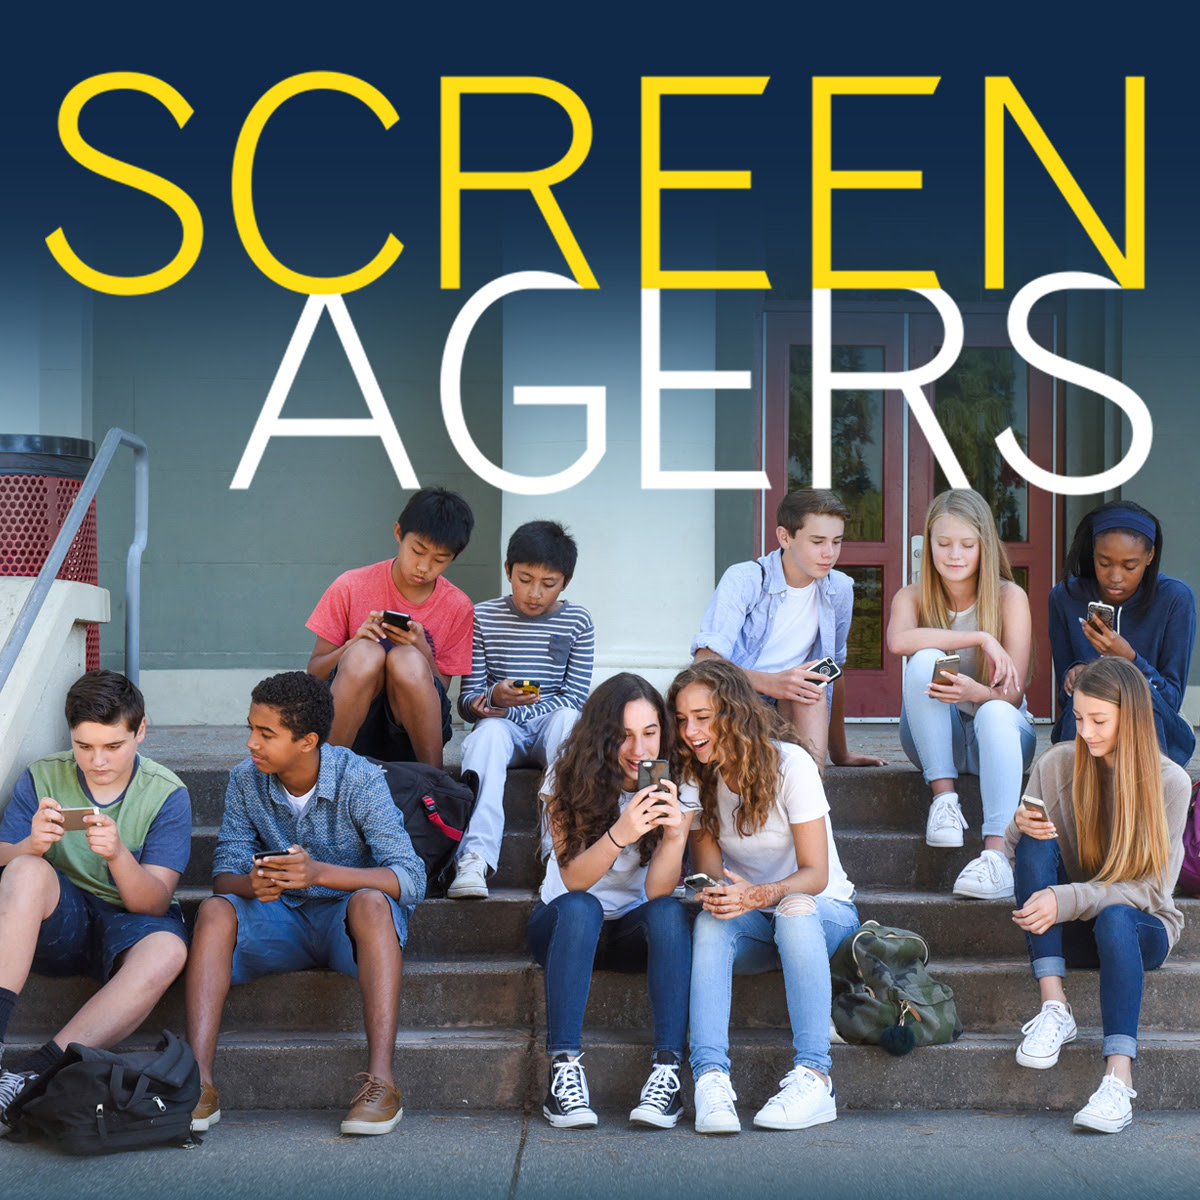 Screenagers Film Presented By Nativity Lutheran Church